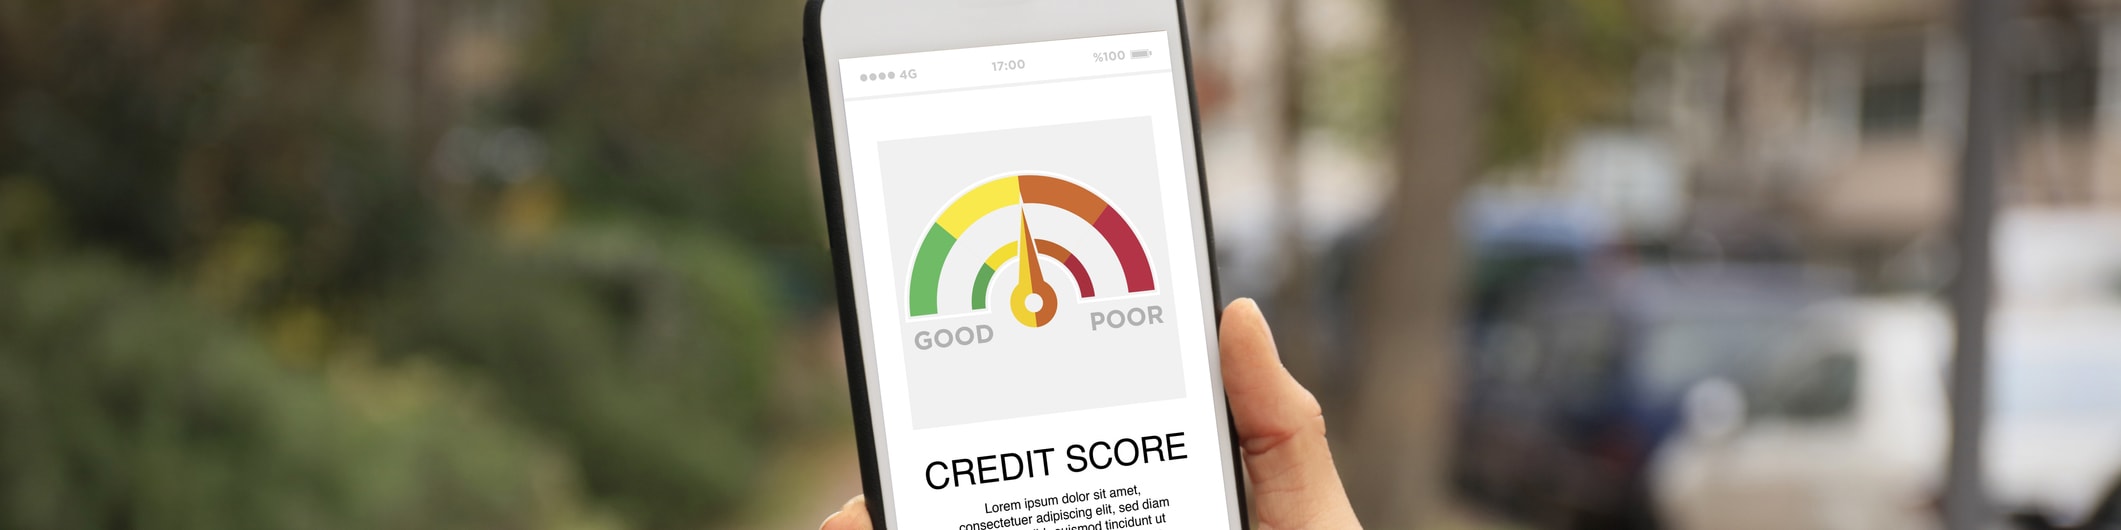 credit score on mobile